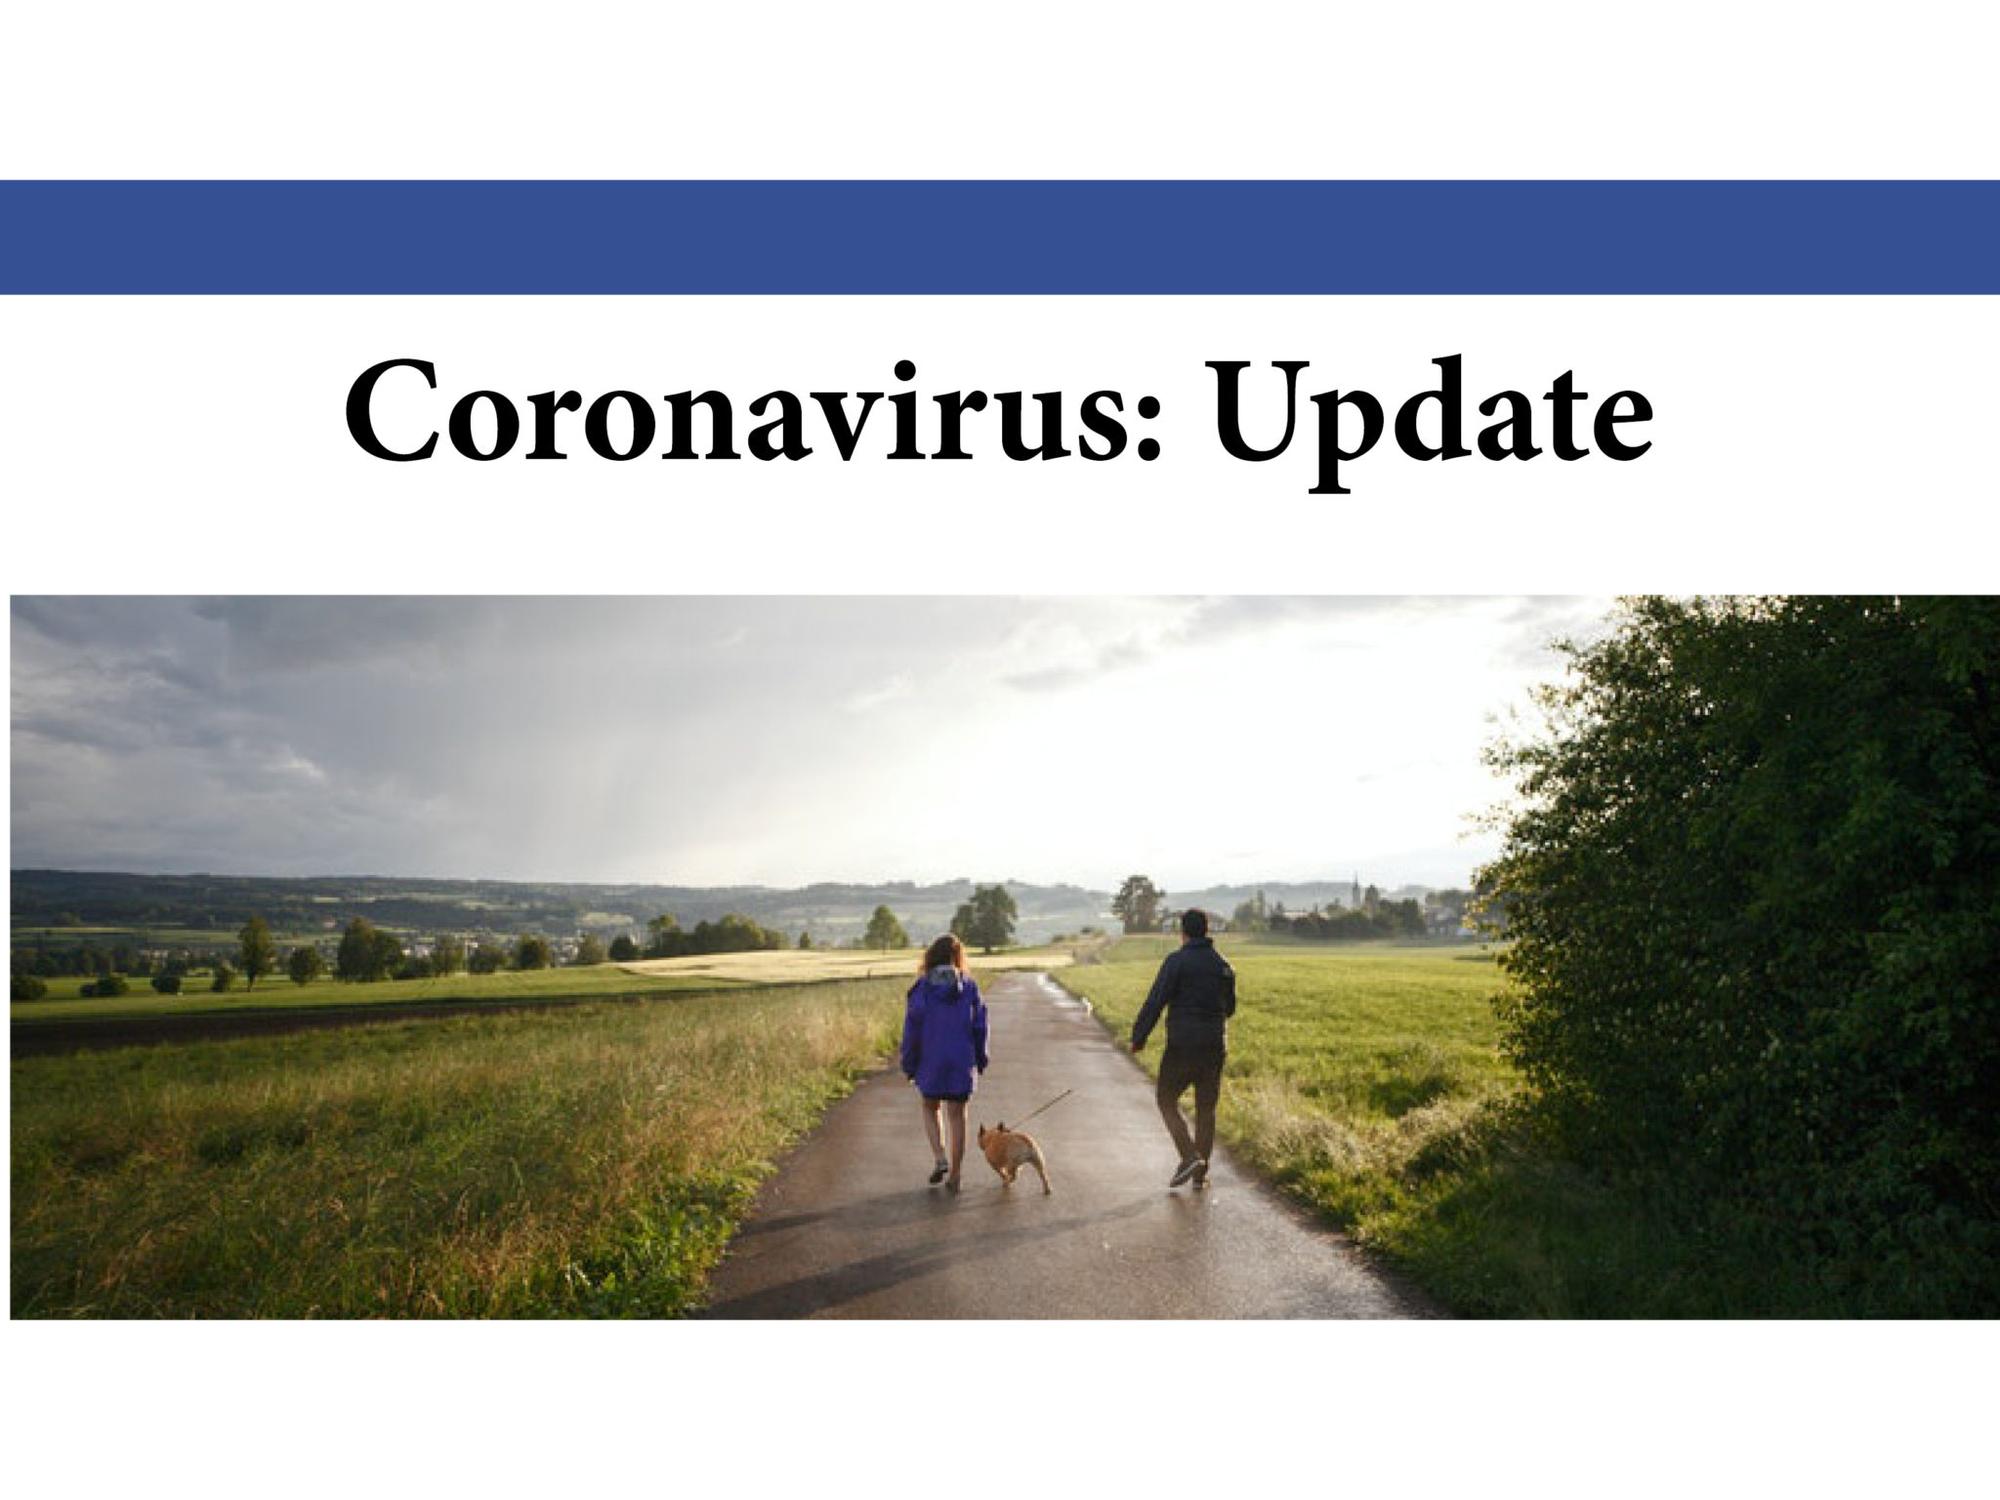 49 COVID-19 cases in EOHU, Roumeliotis warns pandemic will last months